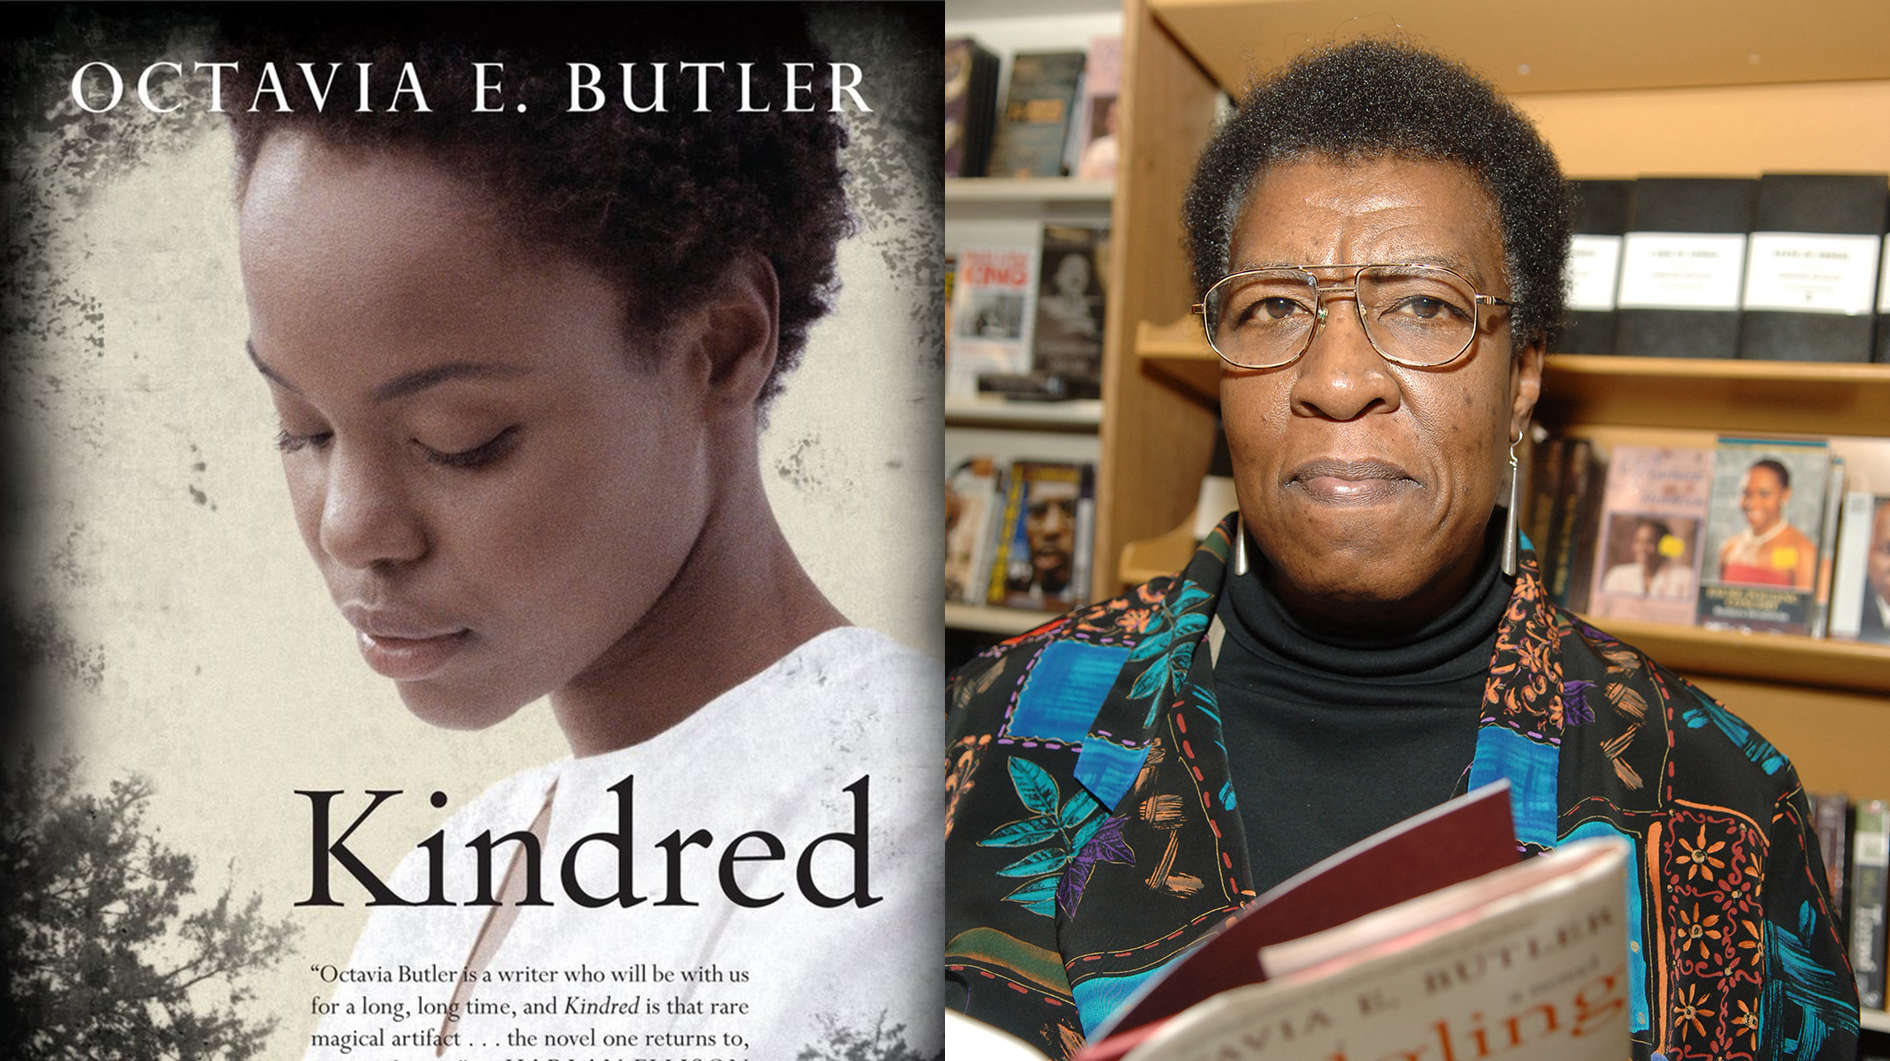 Side by side view, cover of novel Kindred next to portrait of the author, Octavia Butler. Penguin Random House/ Getty Images